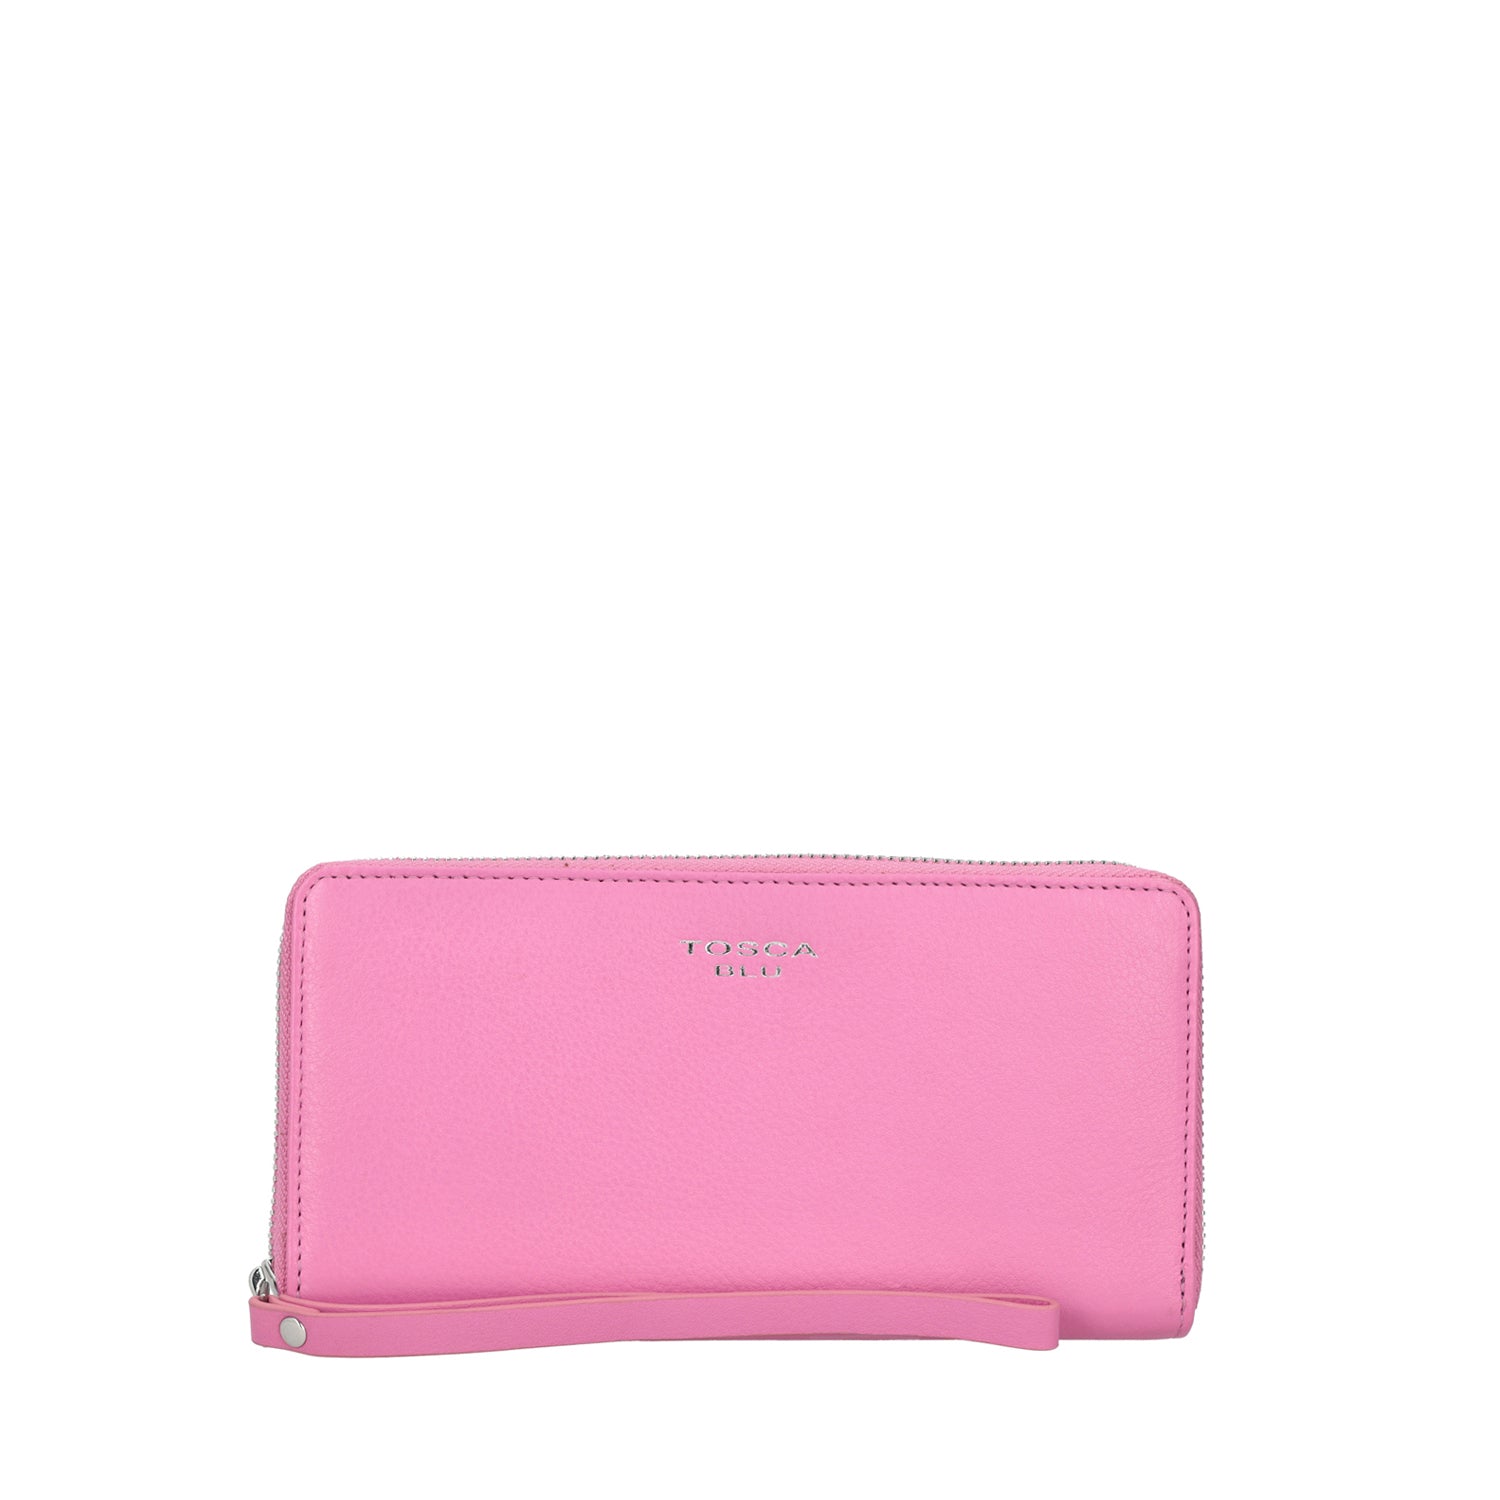 PINK LARGE BASIC WALLETS WALLET IN GENUINE LEATHER